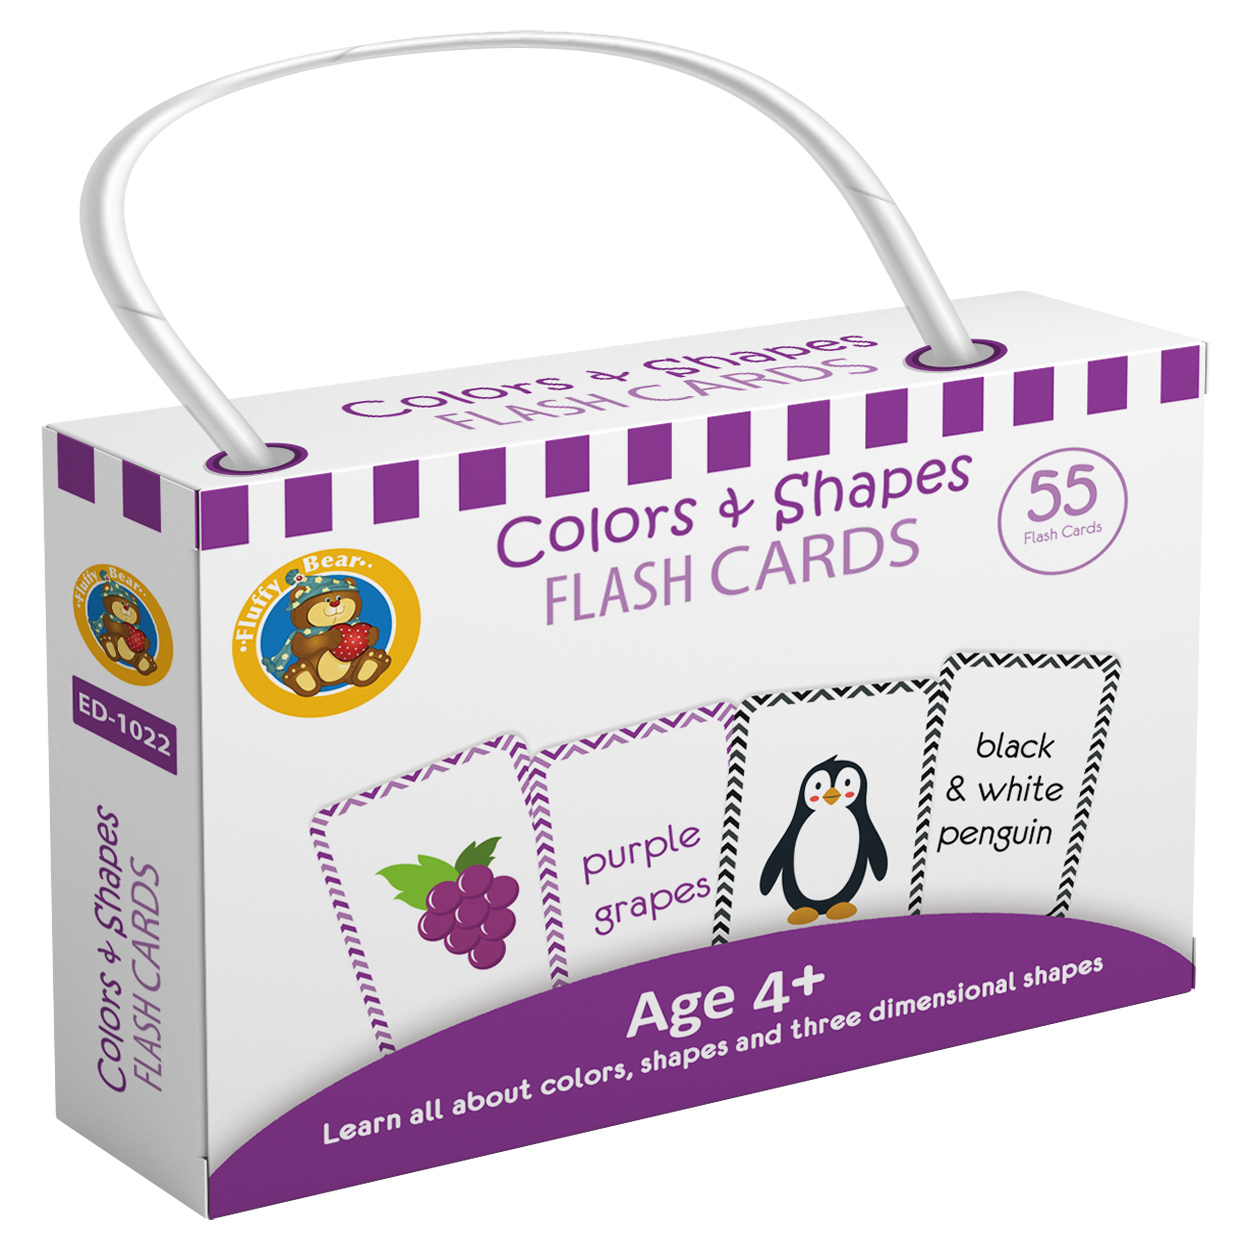 Flash Cards - Colors & Shapes